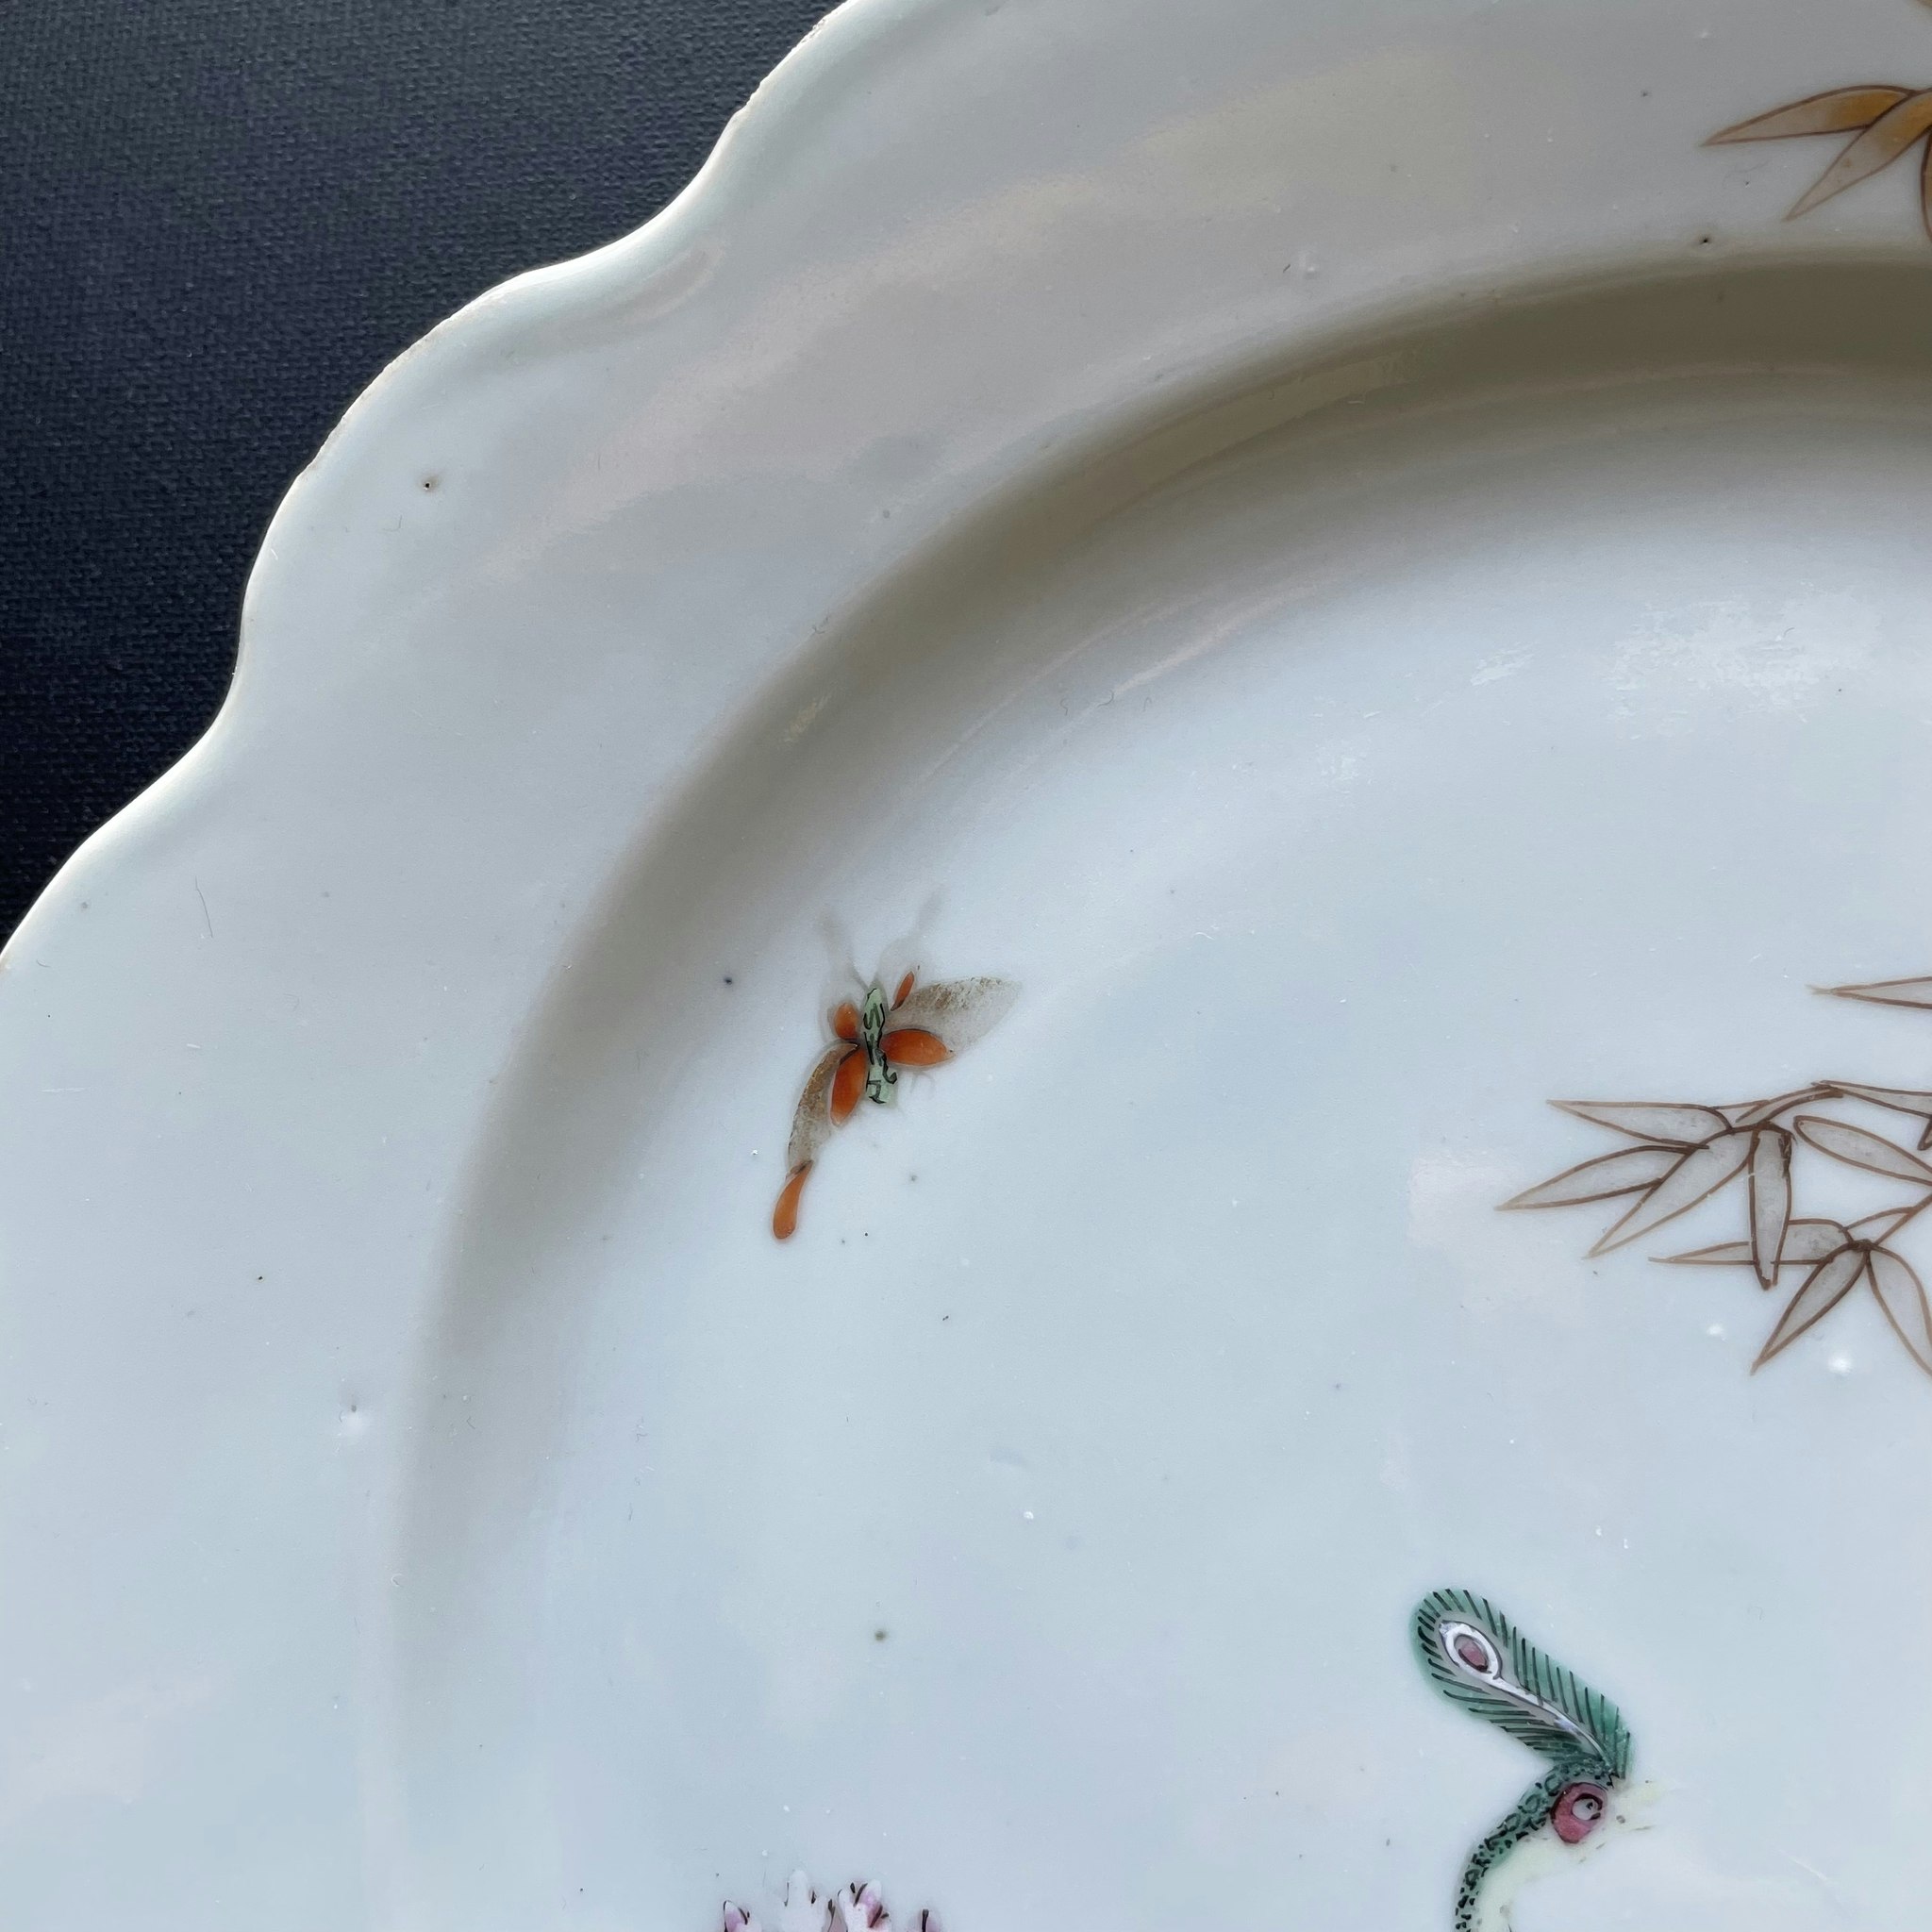 A Chinese famille rose plate with peacock, Qianlong, Qing Dynasty #1016